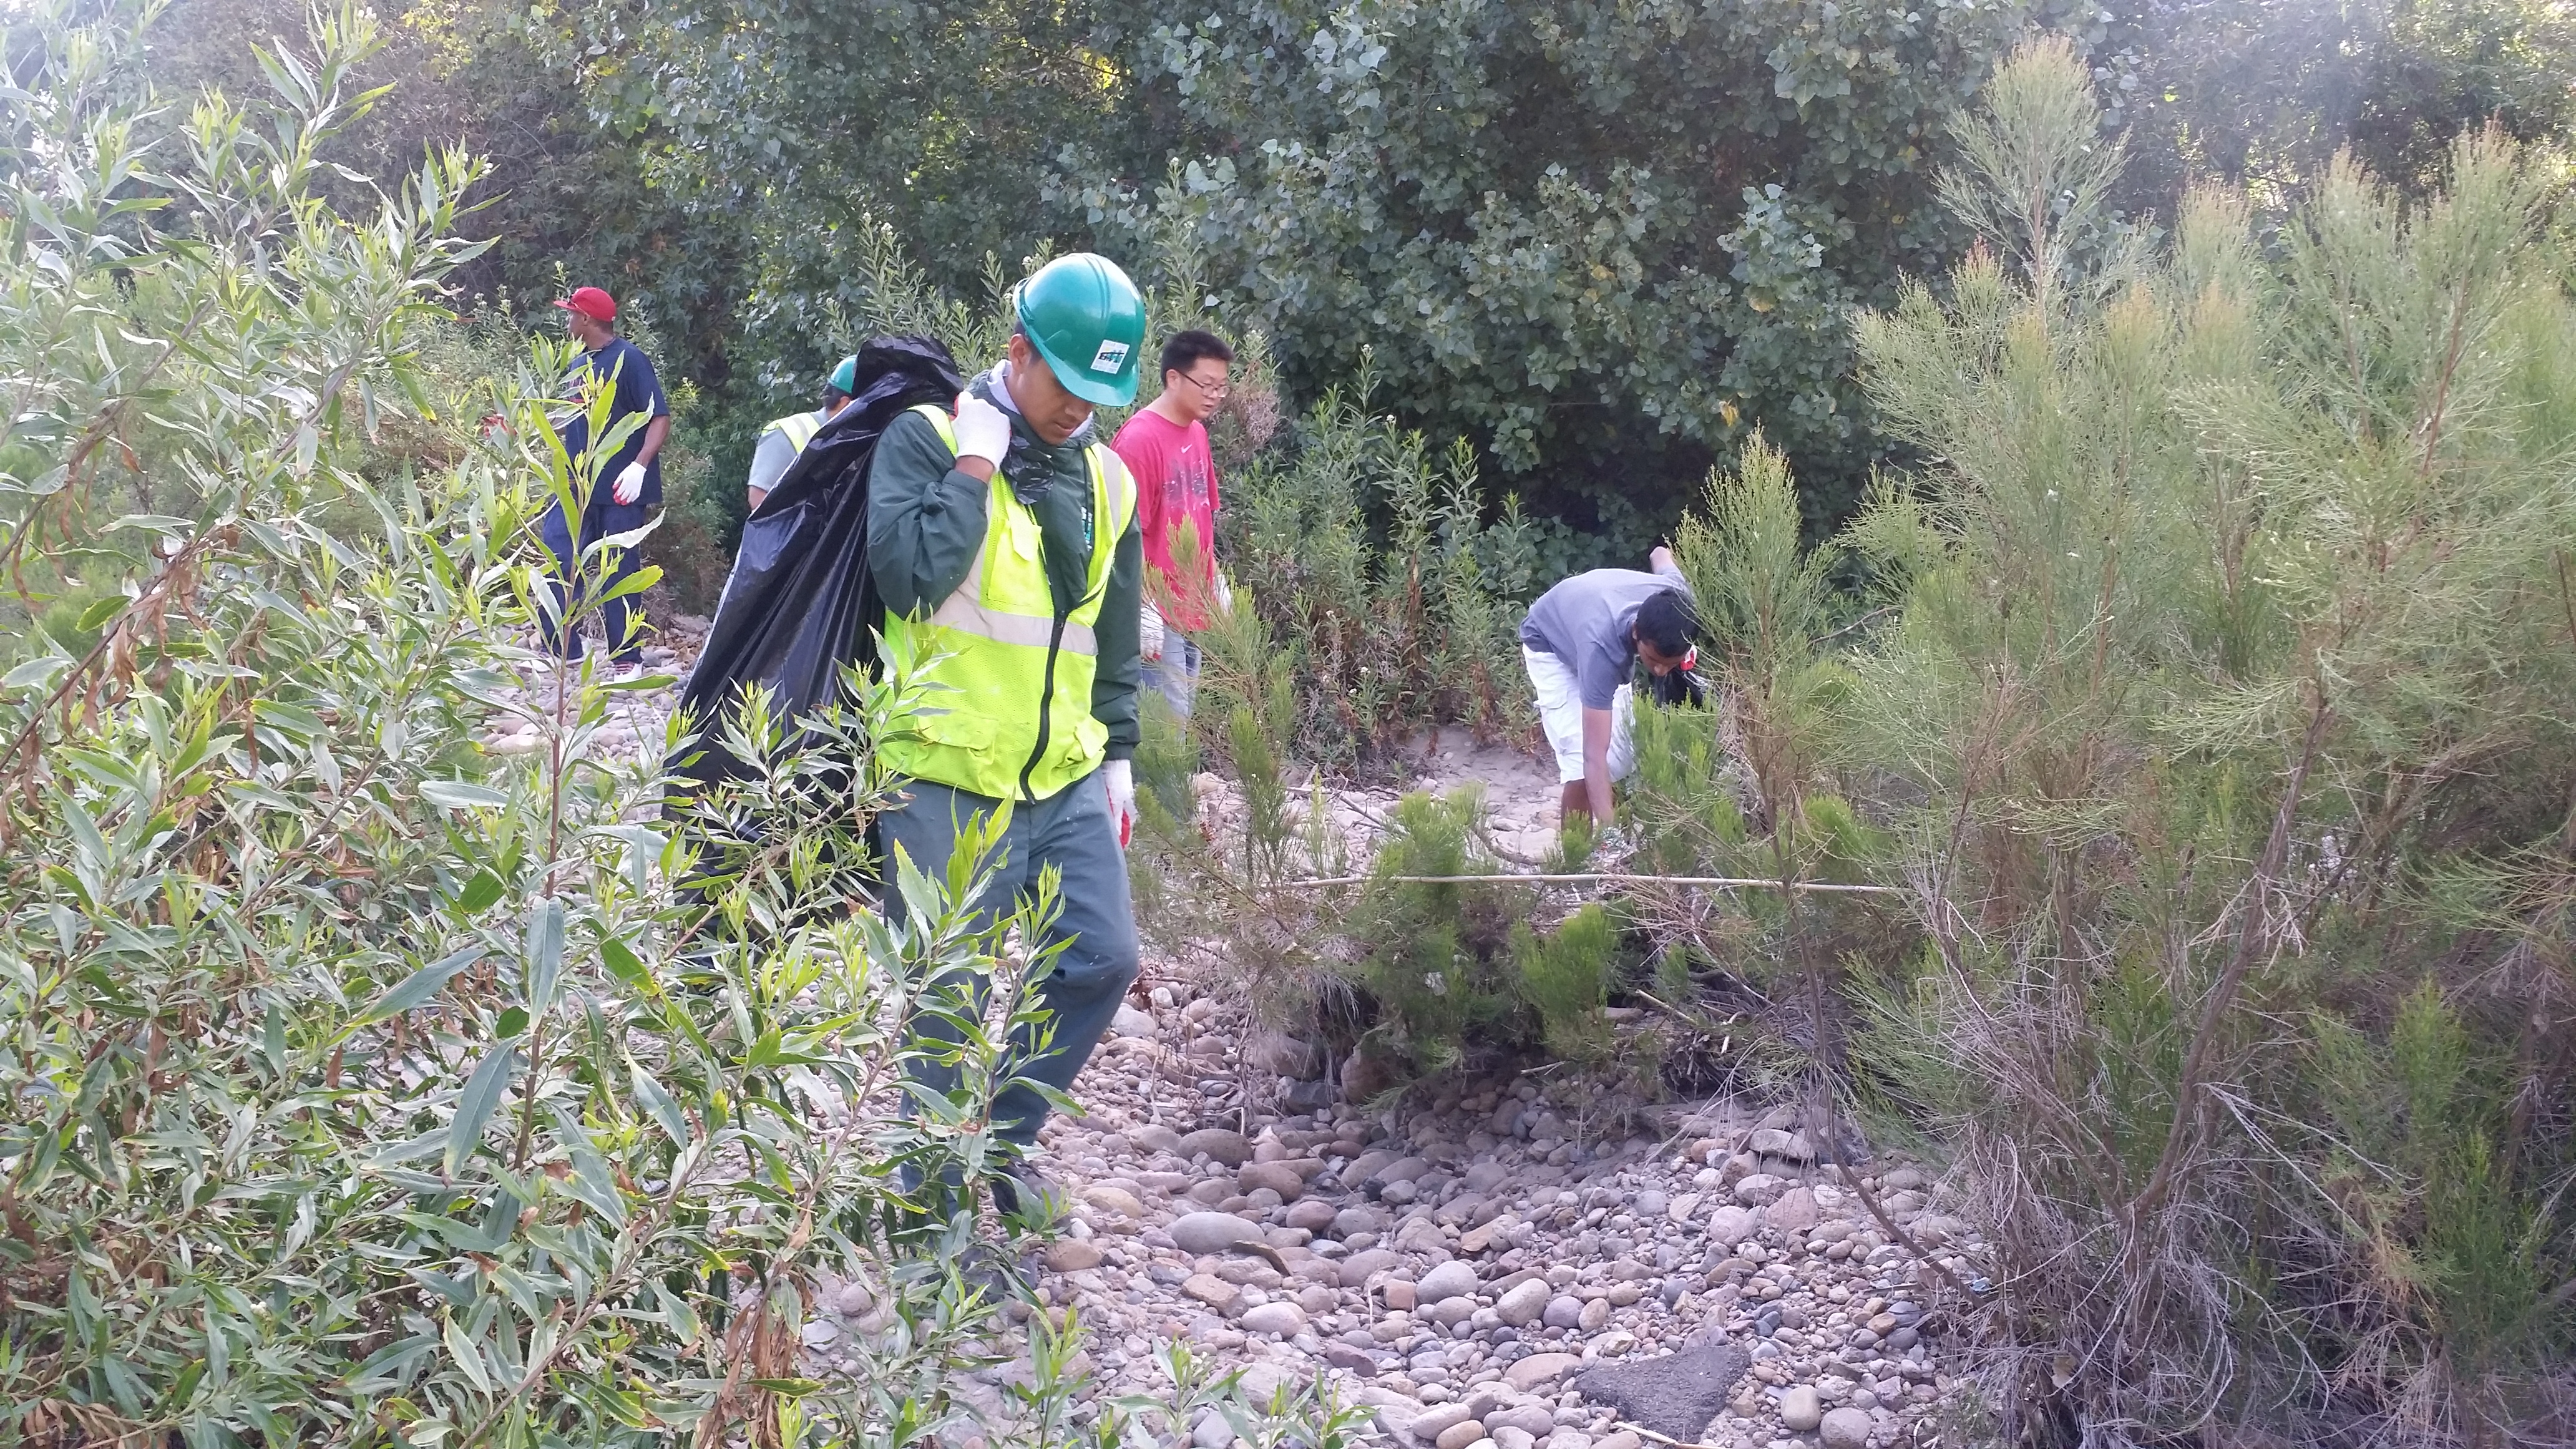 CreekCleanup_7-11-15_080957